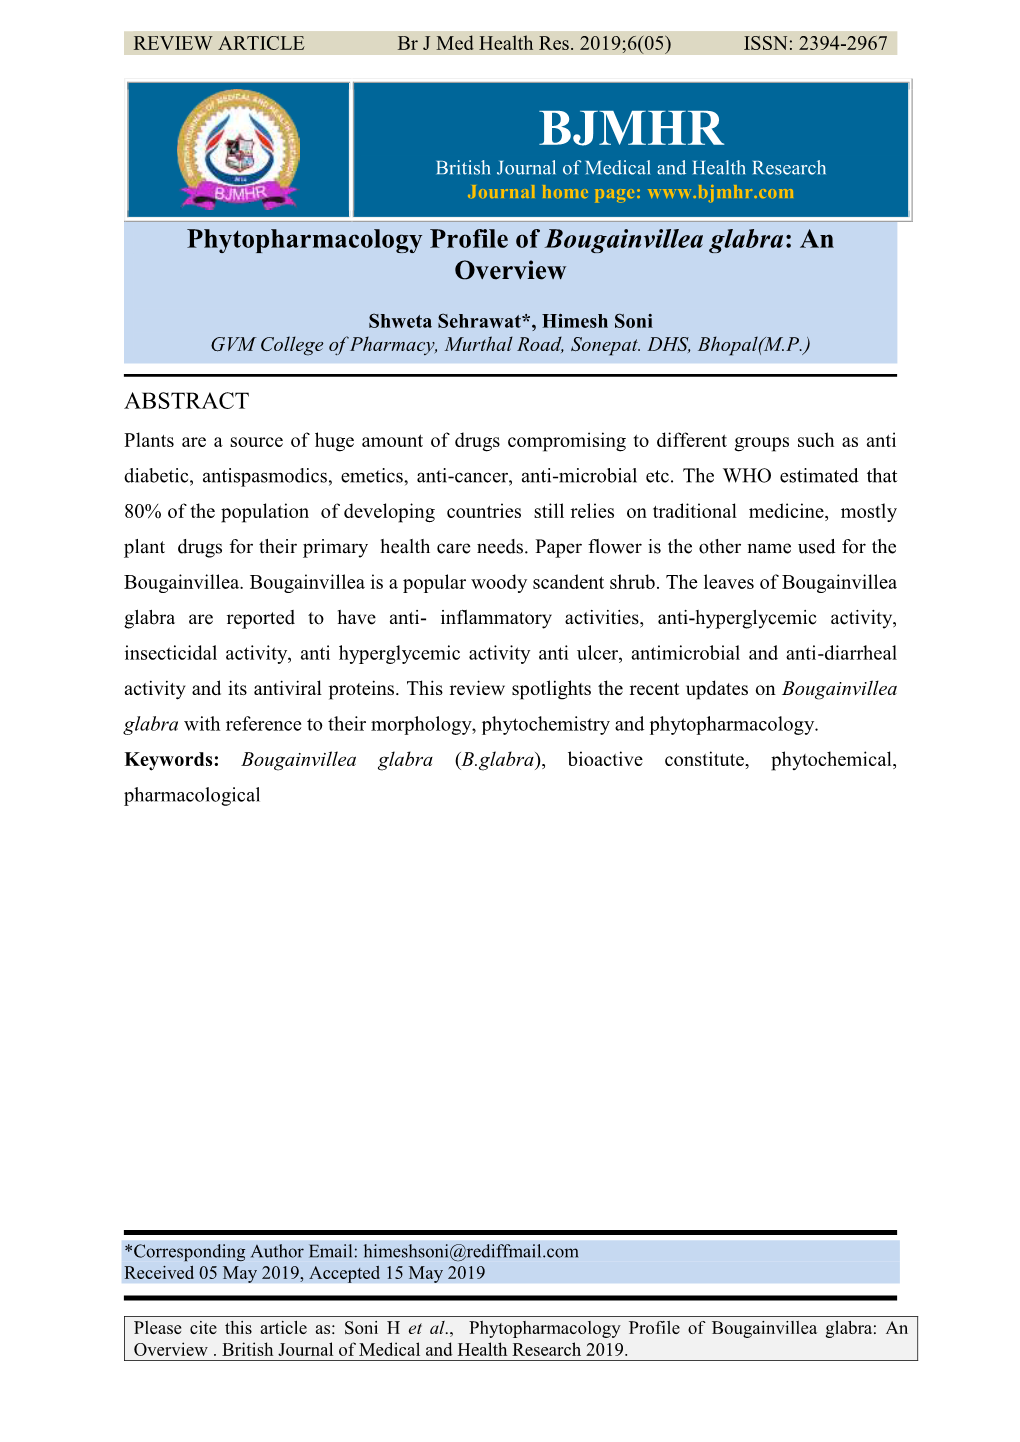 Phytopharmacology Profile of Bougainvillea Glabra: an Overview